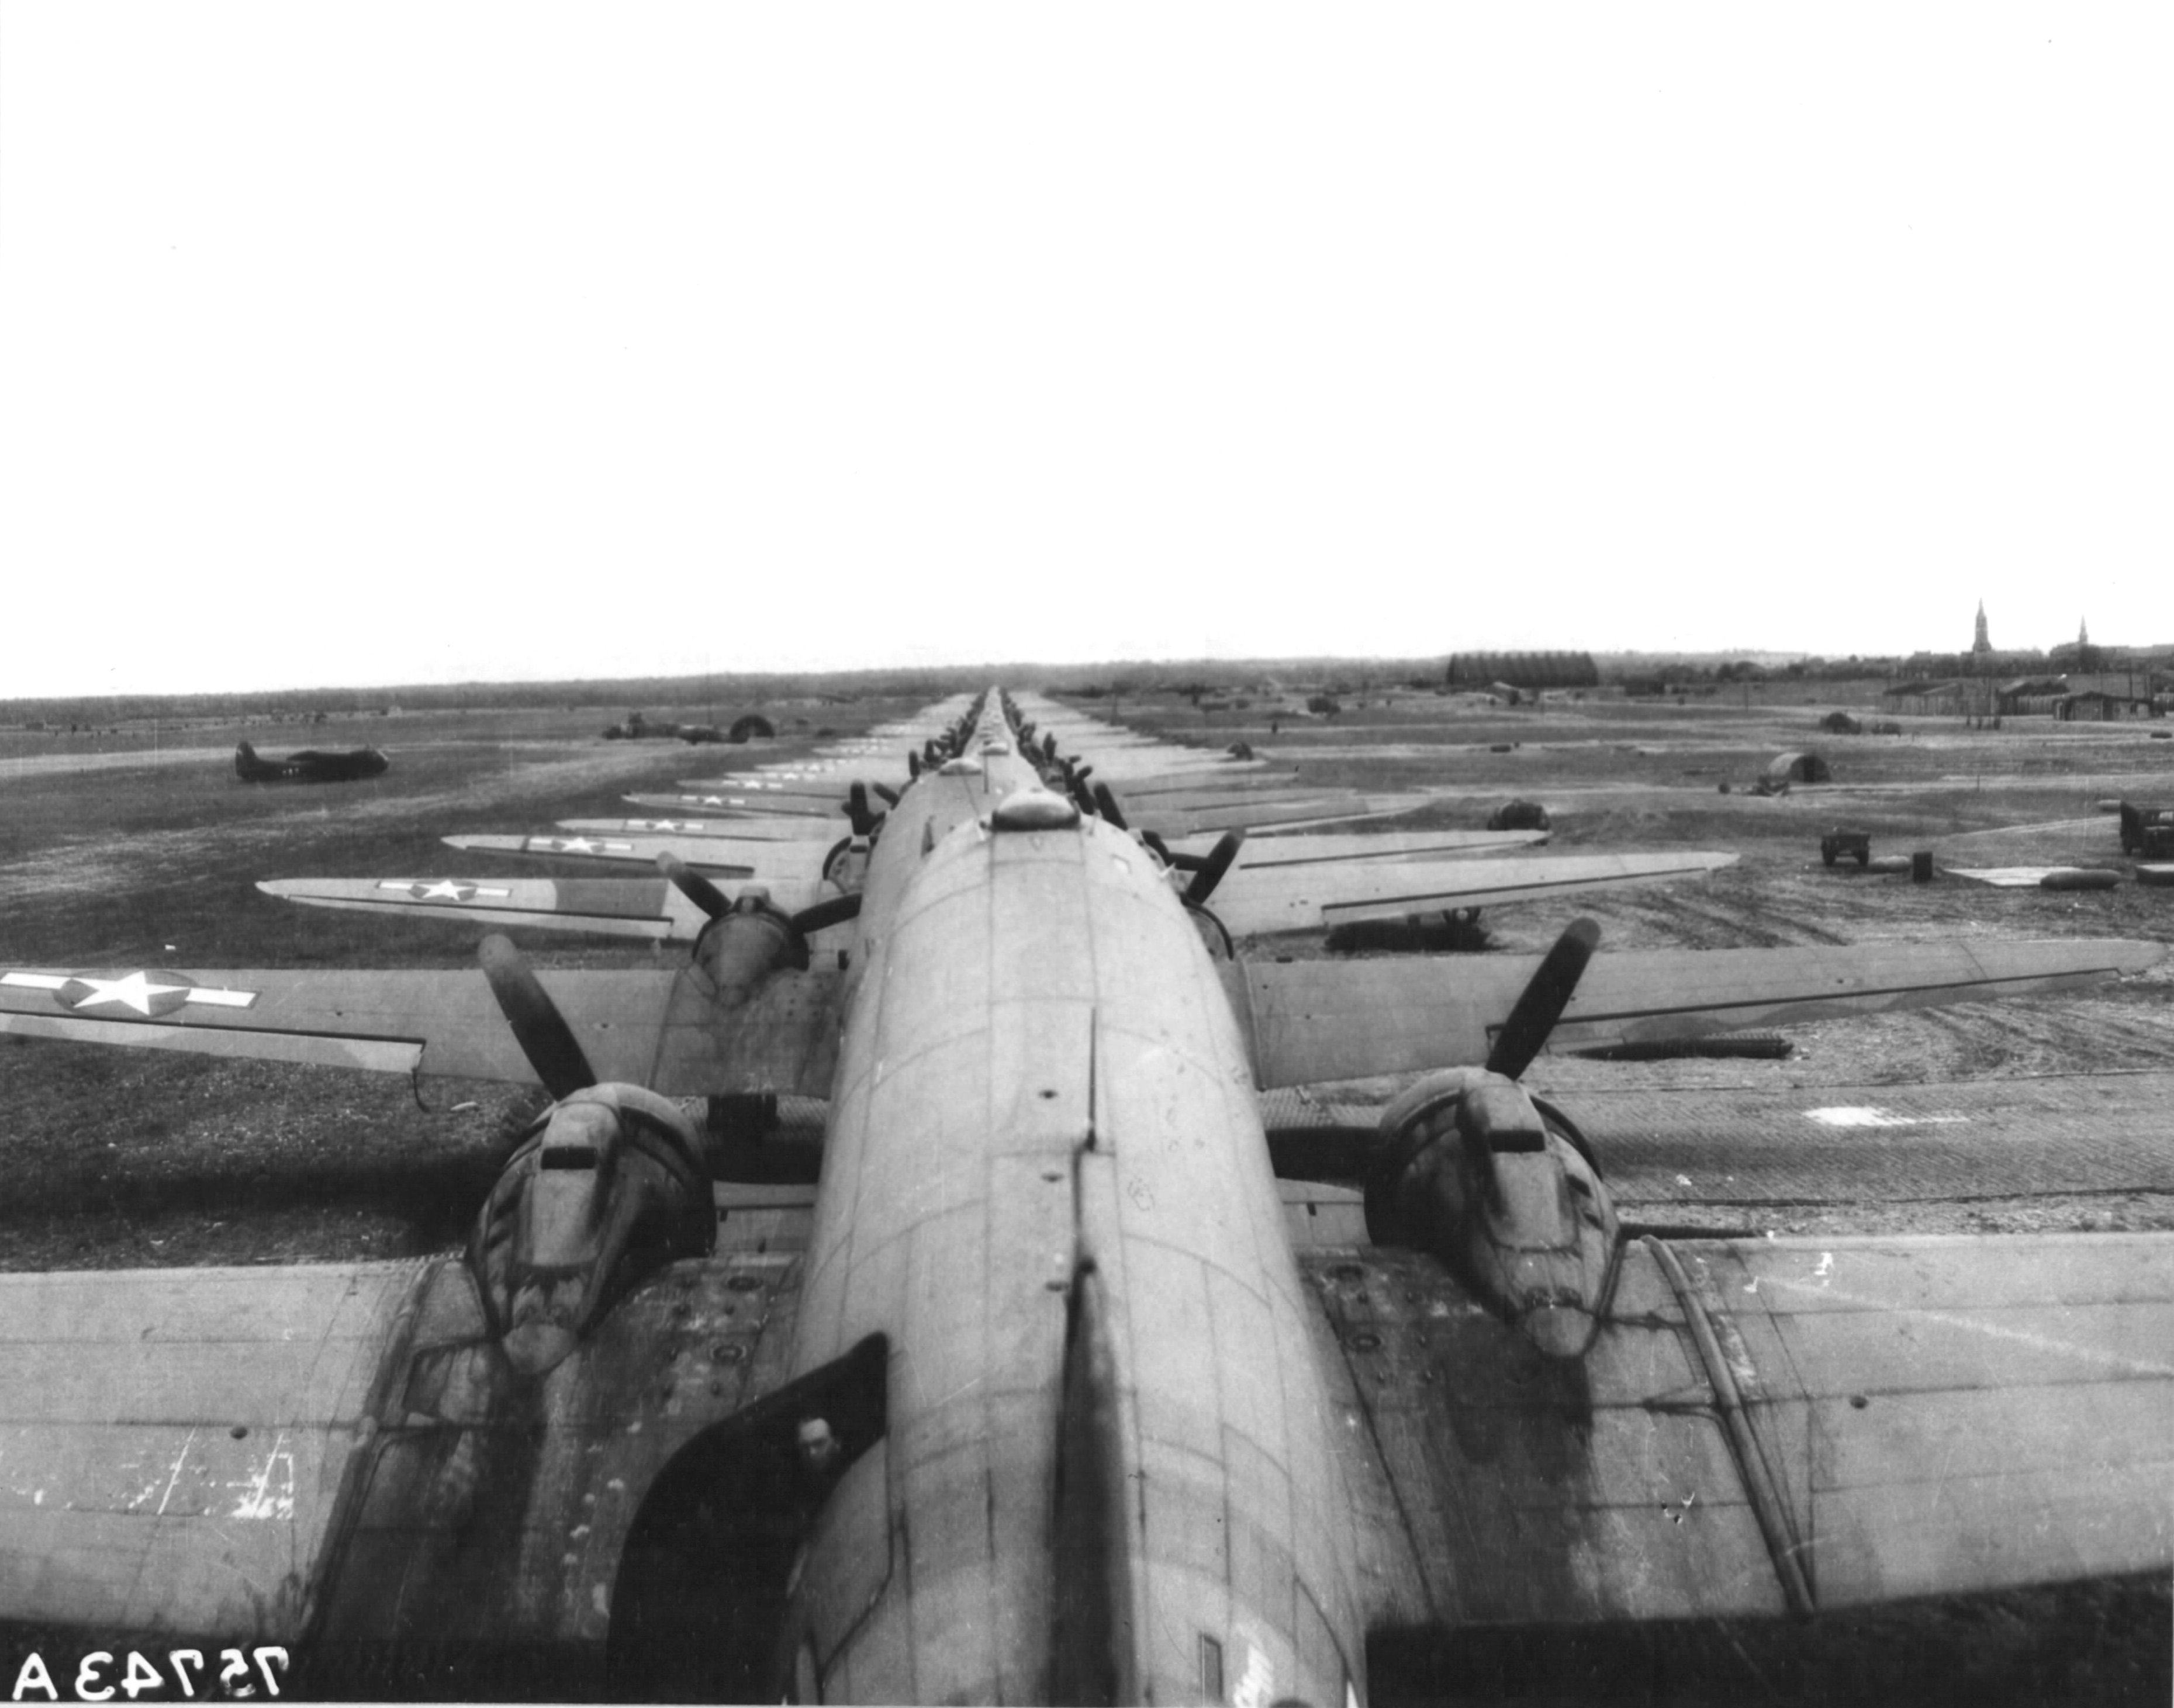 C-47 Skytrains of the 439th Troop Carrier Group preparing to transport the 82nd Airborne to Nijmegen for Operation Market Garden, Juvincourt, France, Sep 8-17 1944